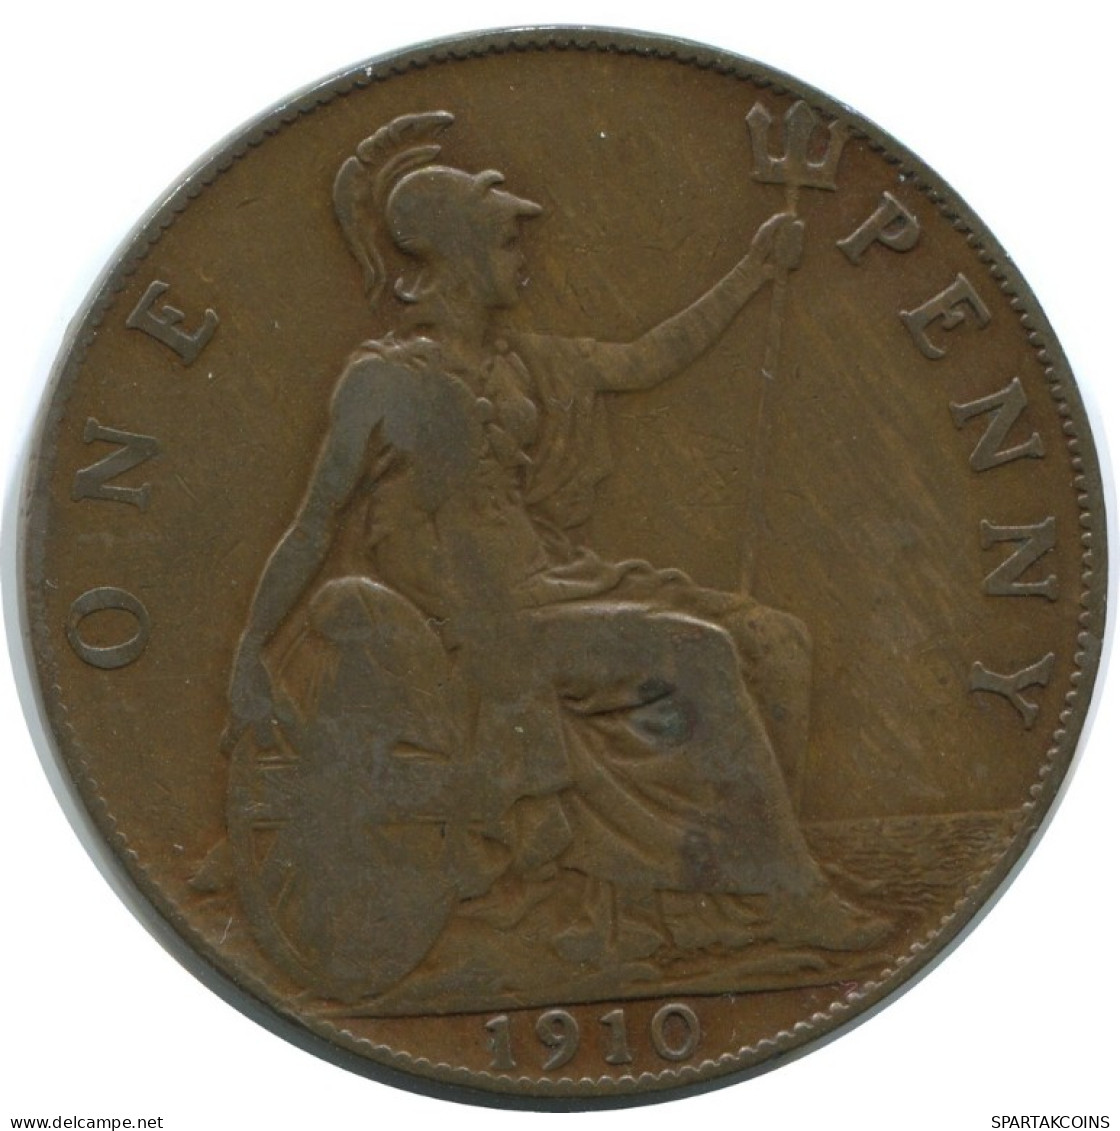 PENNY 1910 UK GREAT BRITAIN Coin #AG866.1.U.A - D. 1 Penny